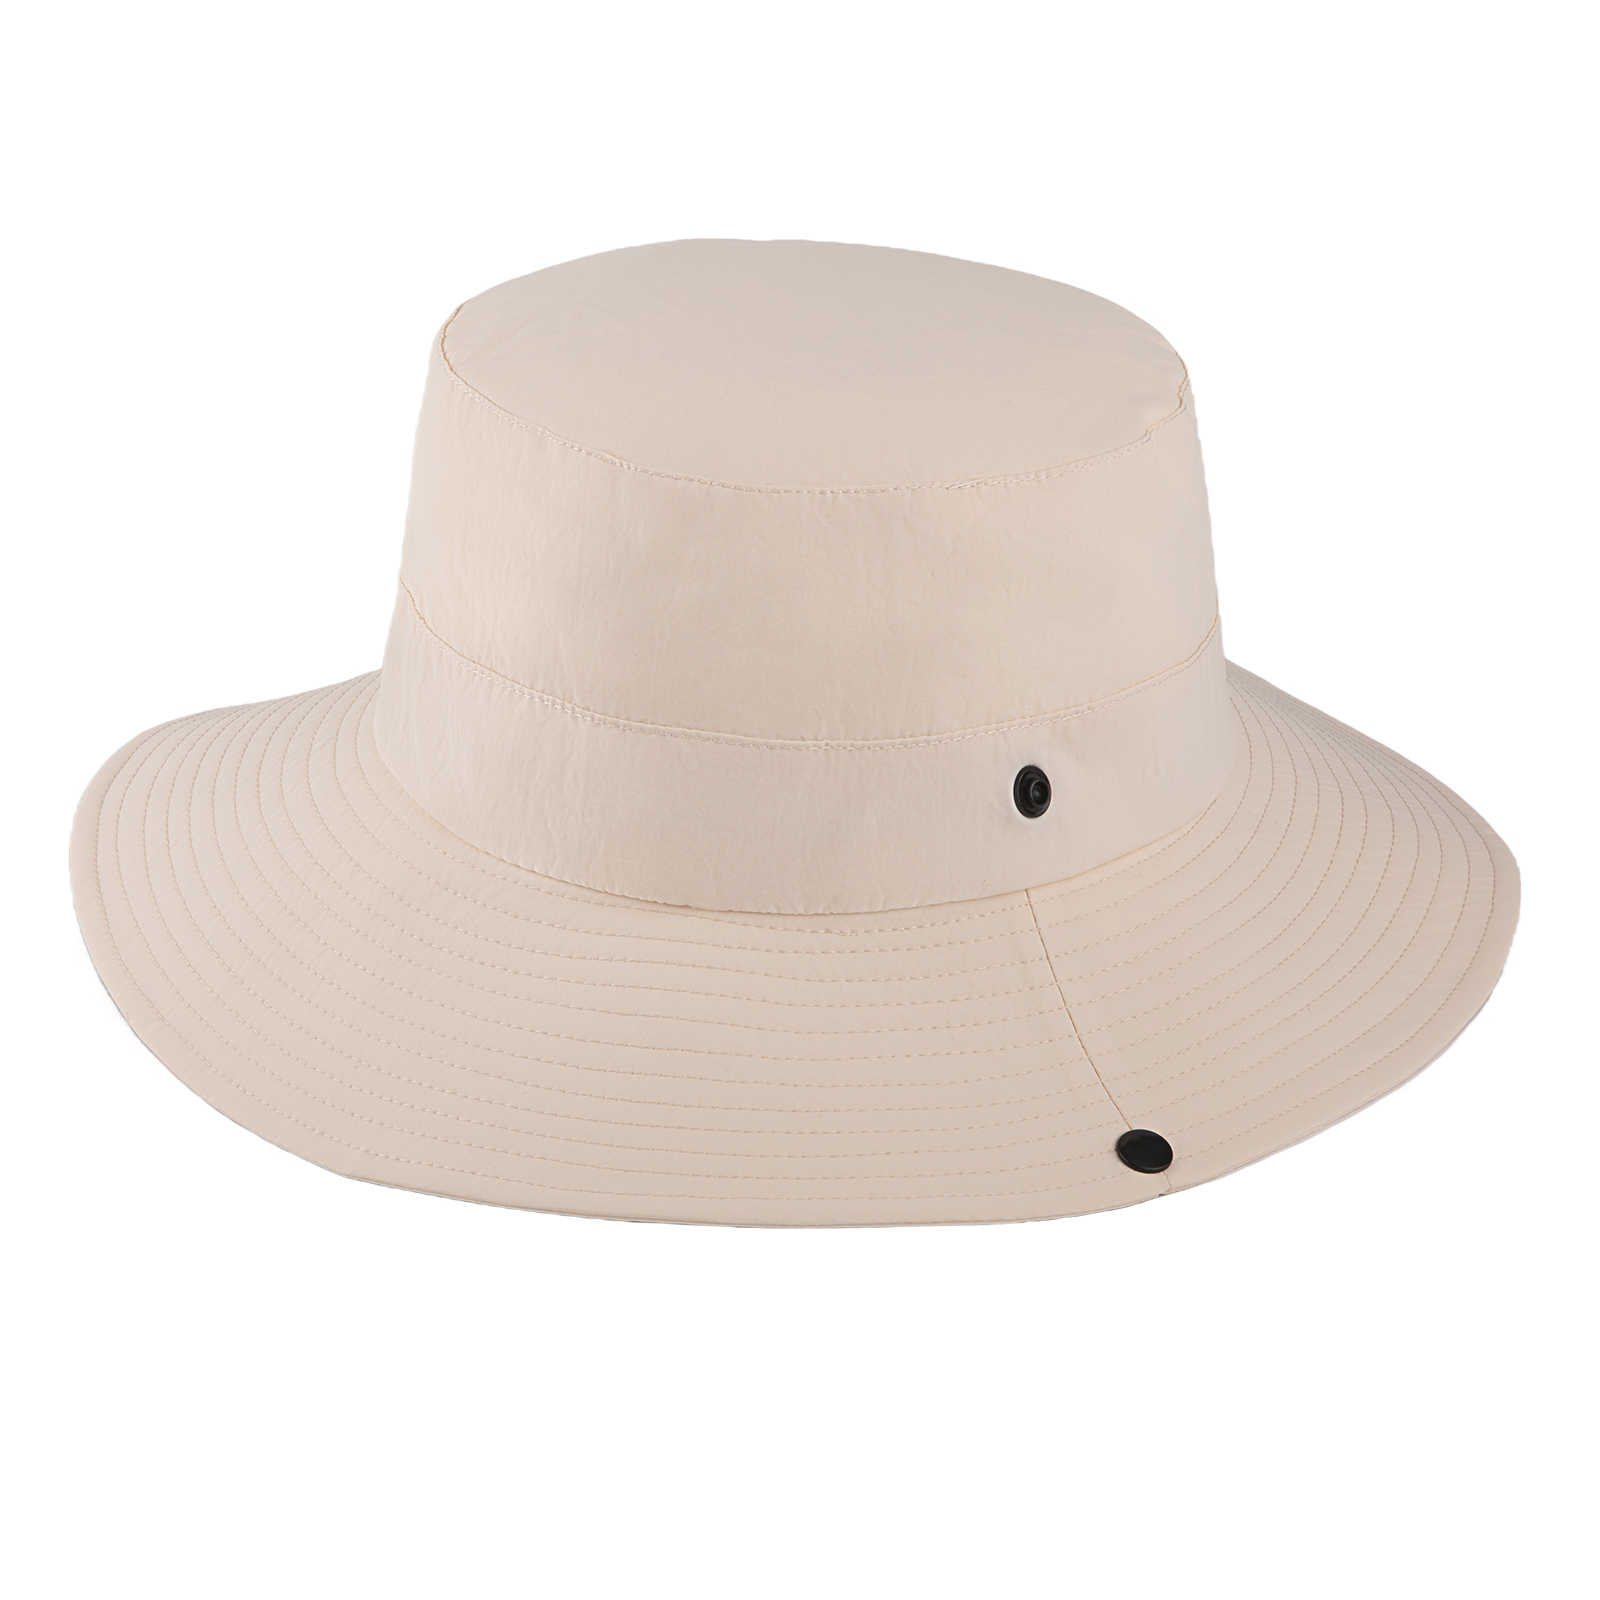 COOPLUS Sun Hats for Men Women Fishing Hat Breathable Wide Brim Summer UV Protection Hat - image 3 of 5